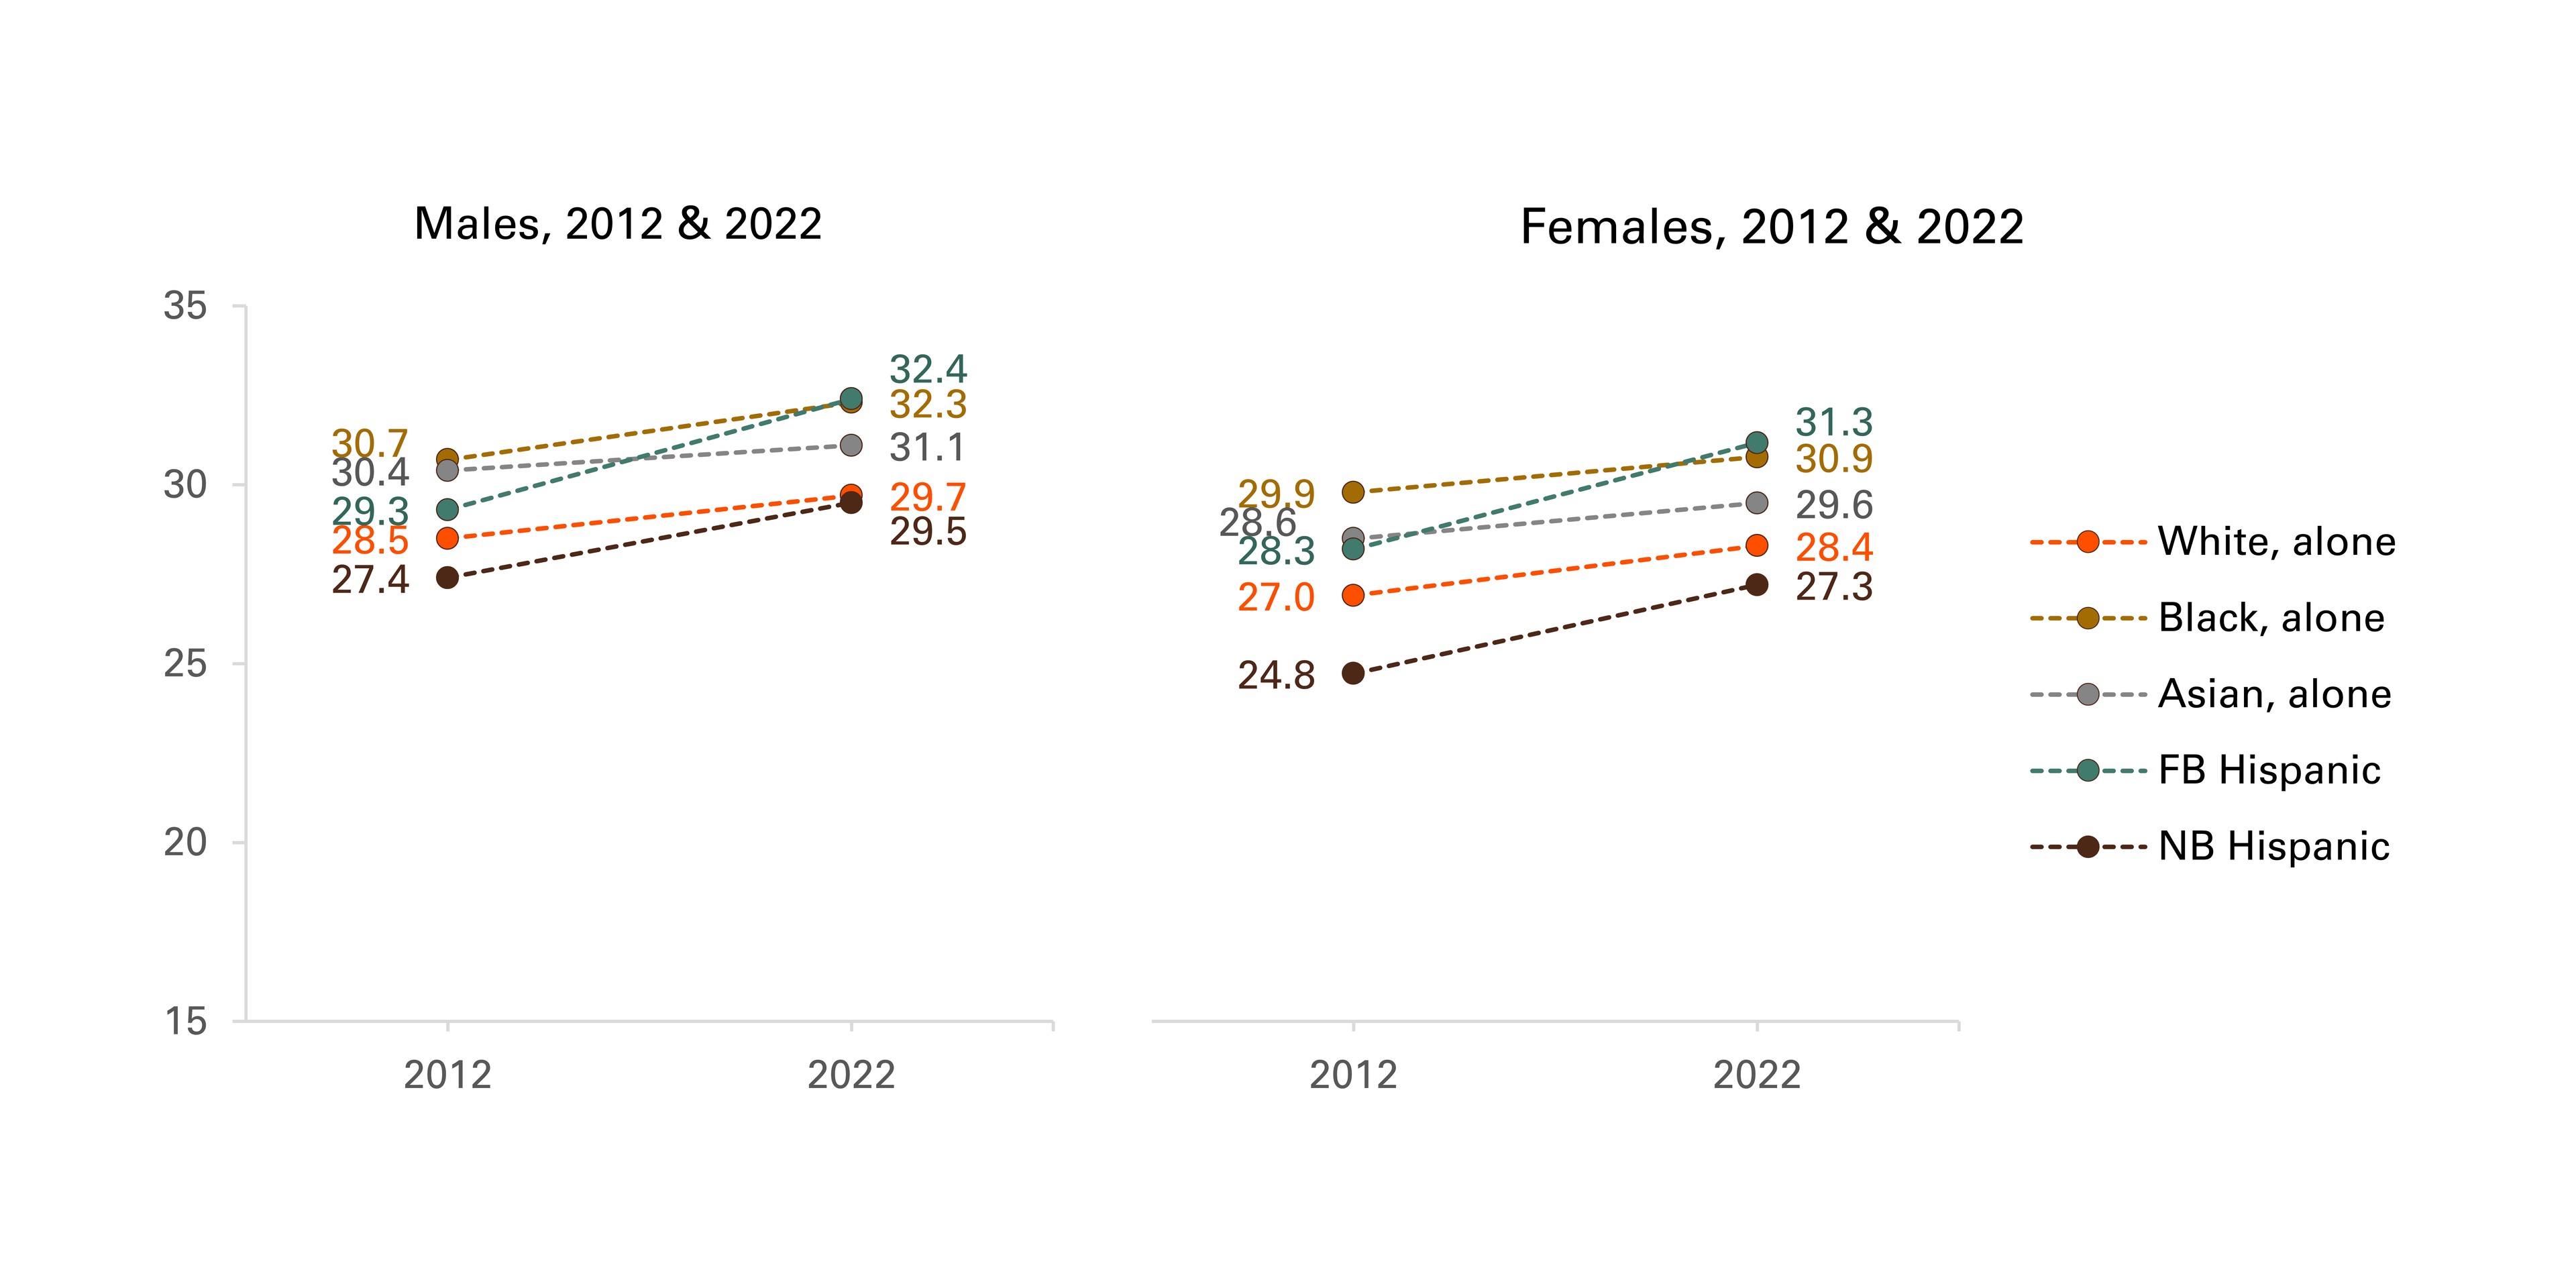 Figure 2. Median Age at First Marriage by Race/Ethnicity for Males and Females, 2021 & 2022